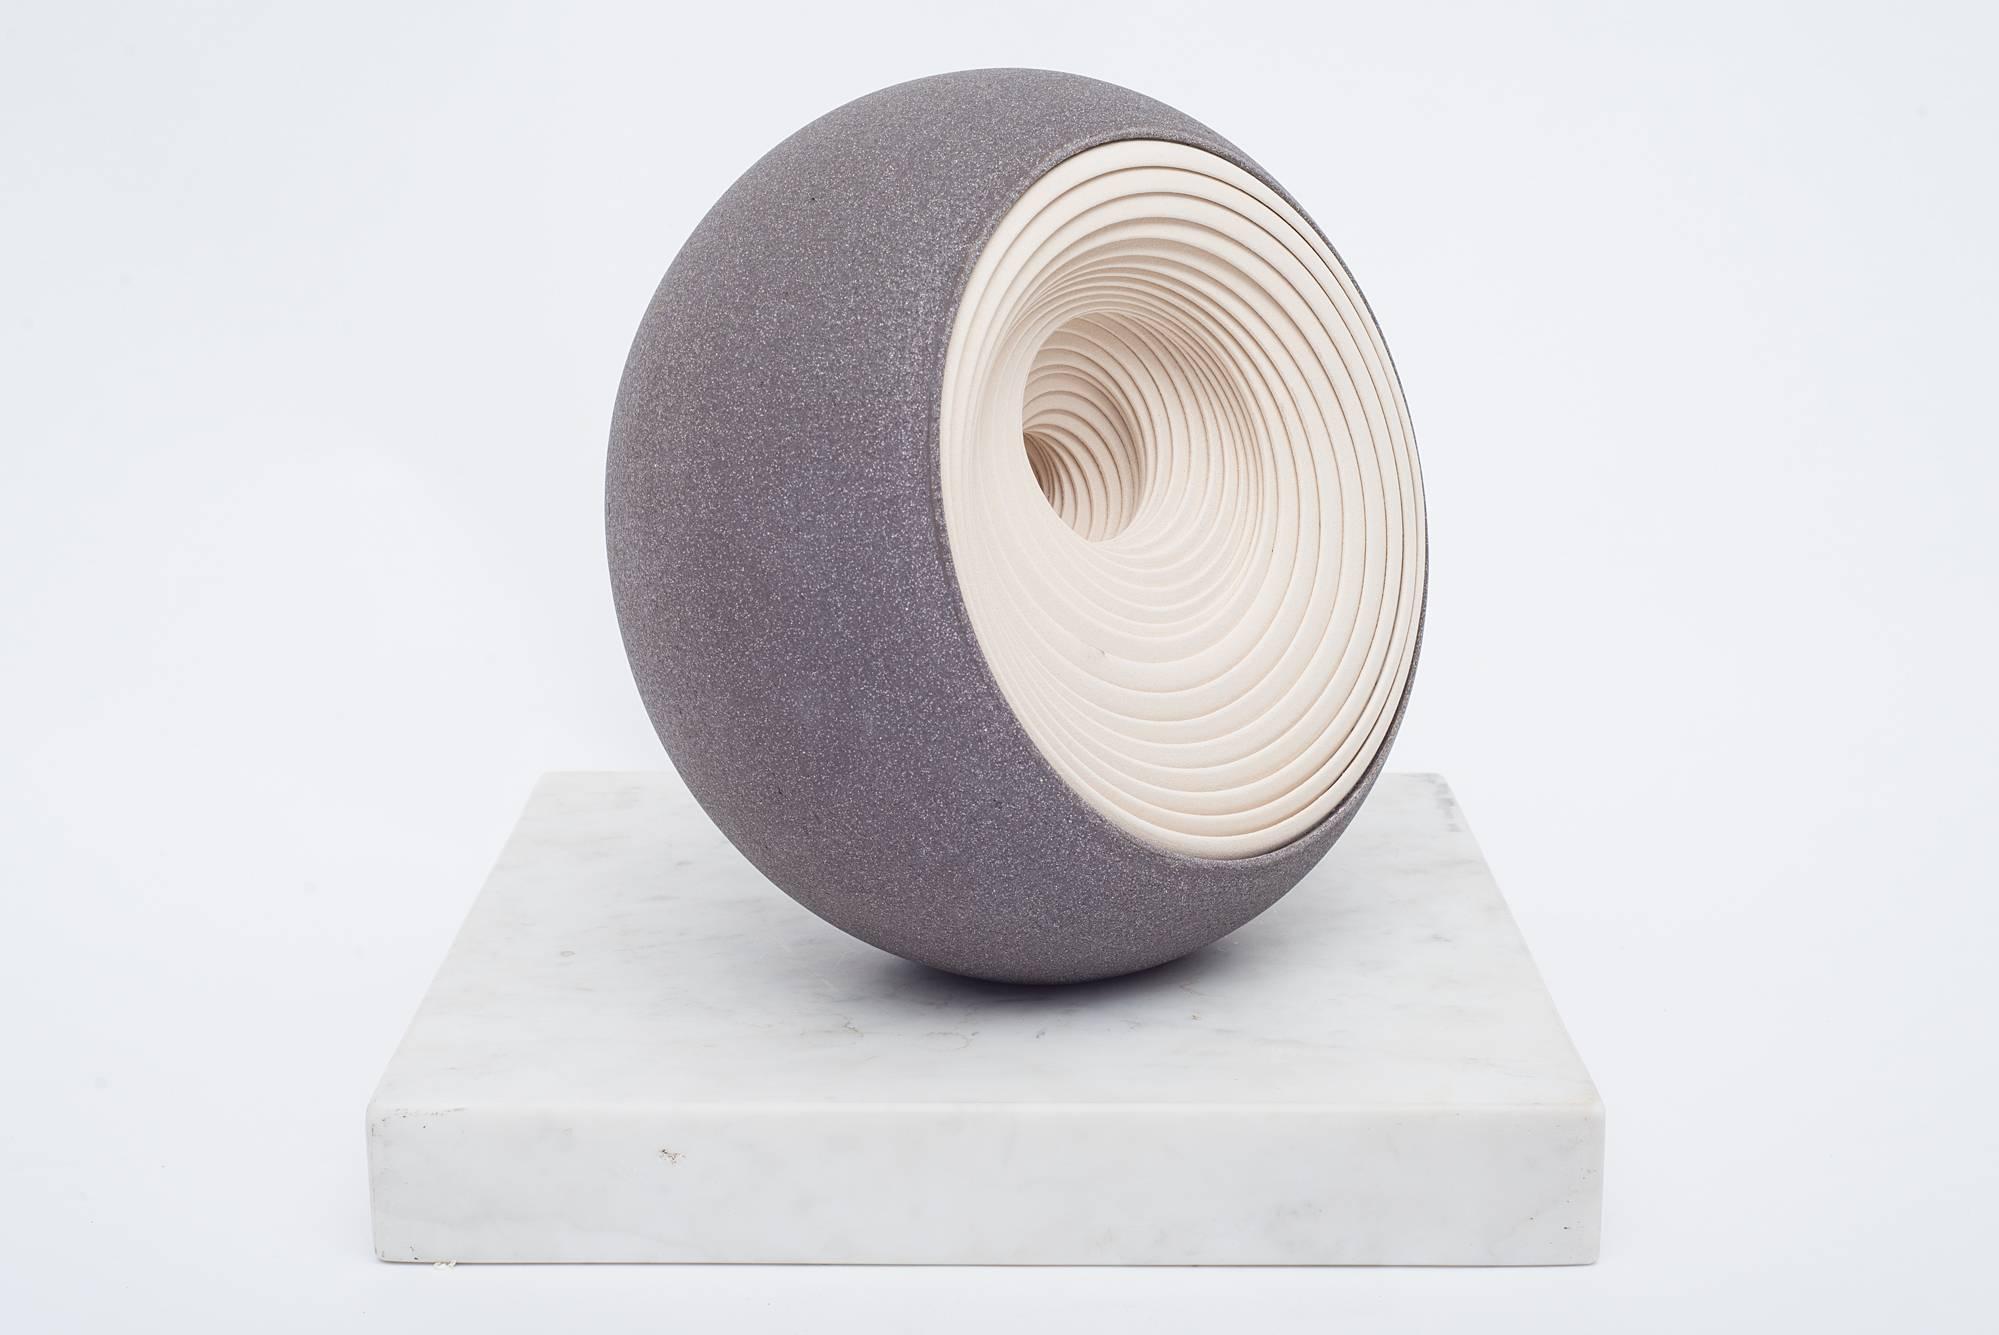 Chambers works in his studio on the Isle of Wight where he creates each piece without the aid of sketches or designs, preferring to experiment as he works. Each “layer” is an individual section thrown on a potter’s wheel which he then assembles with